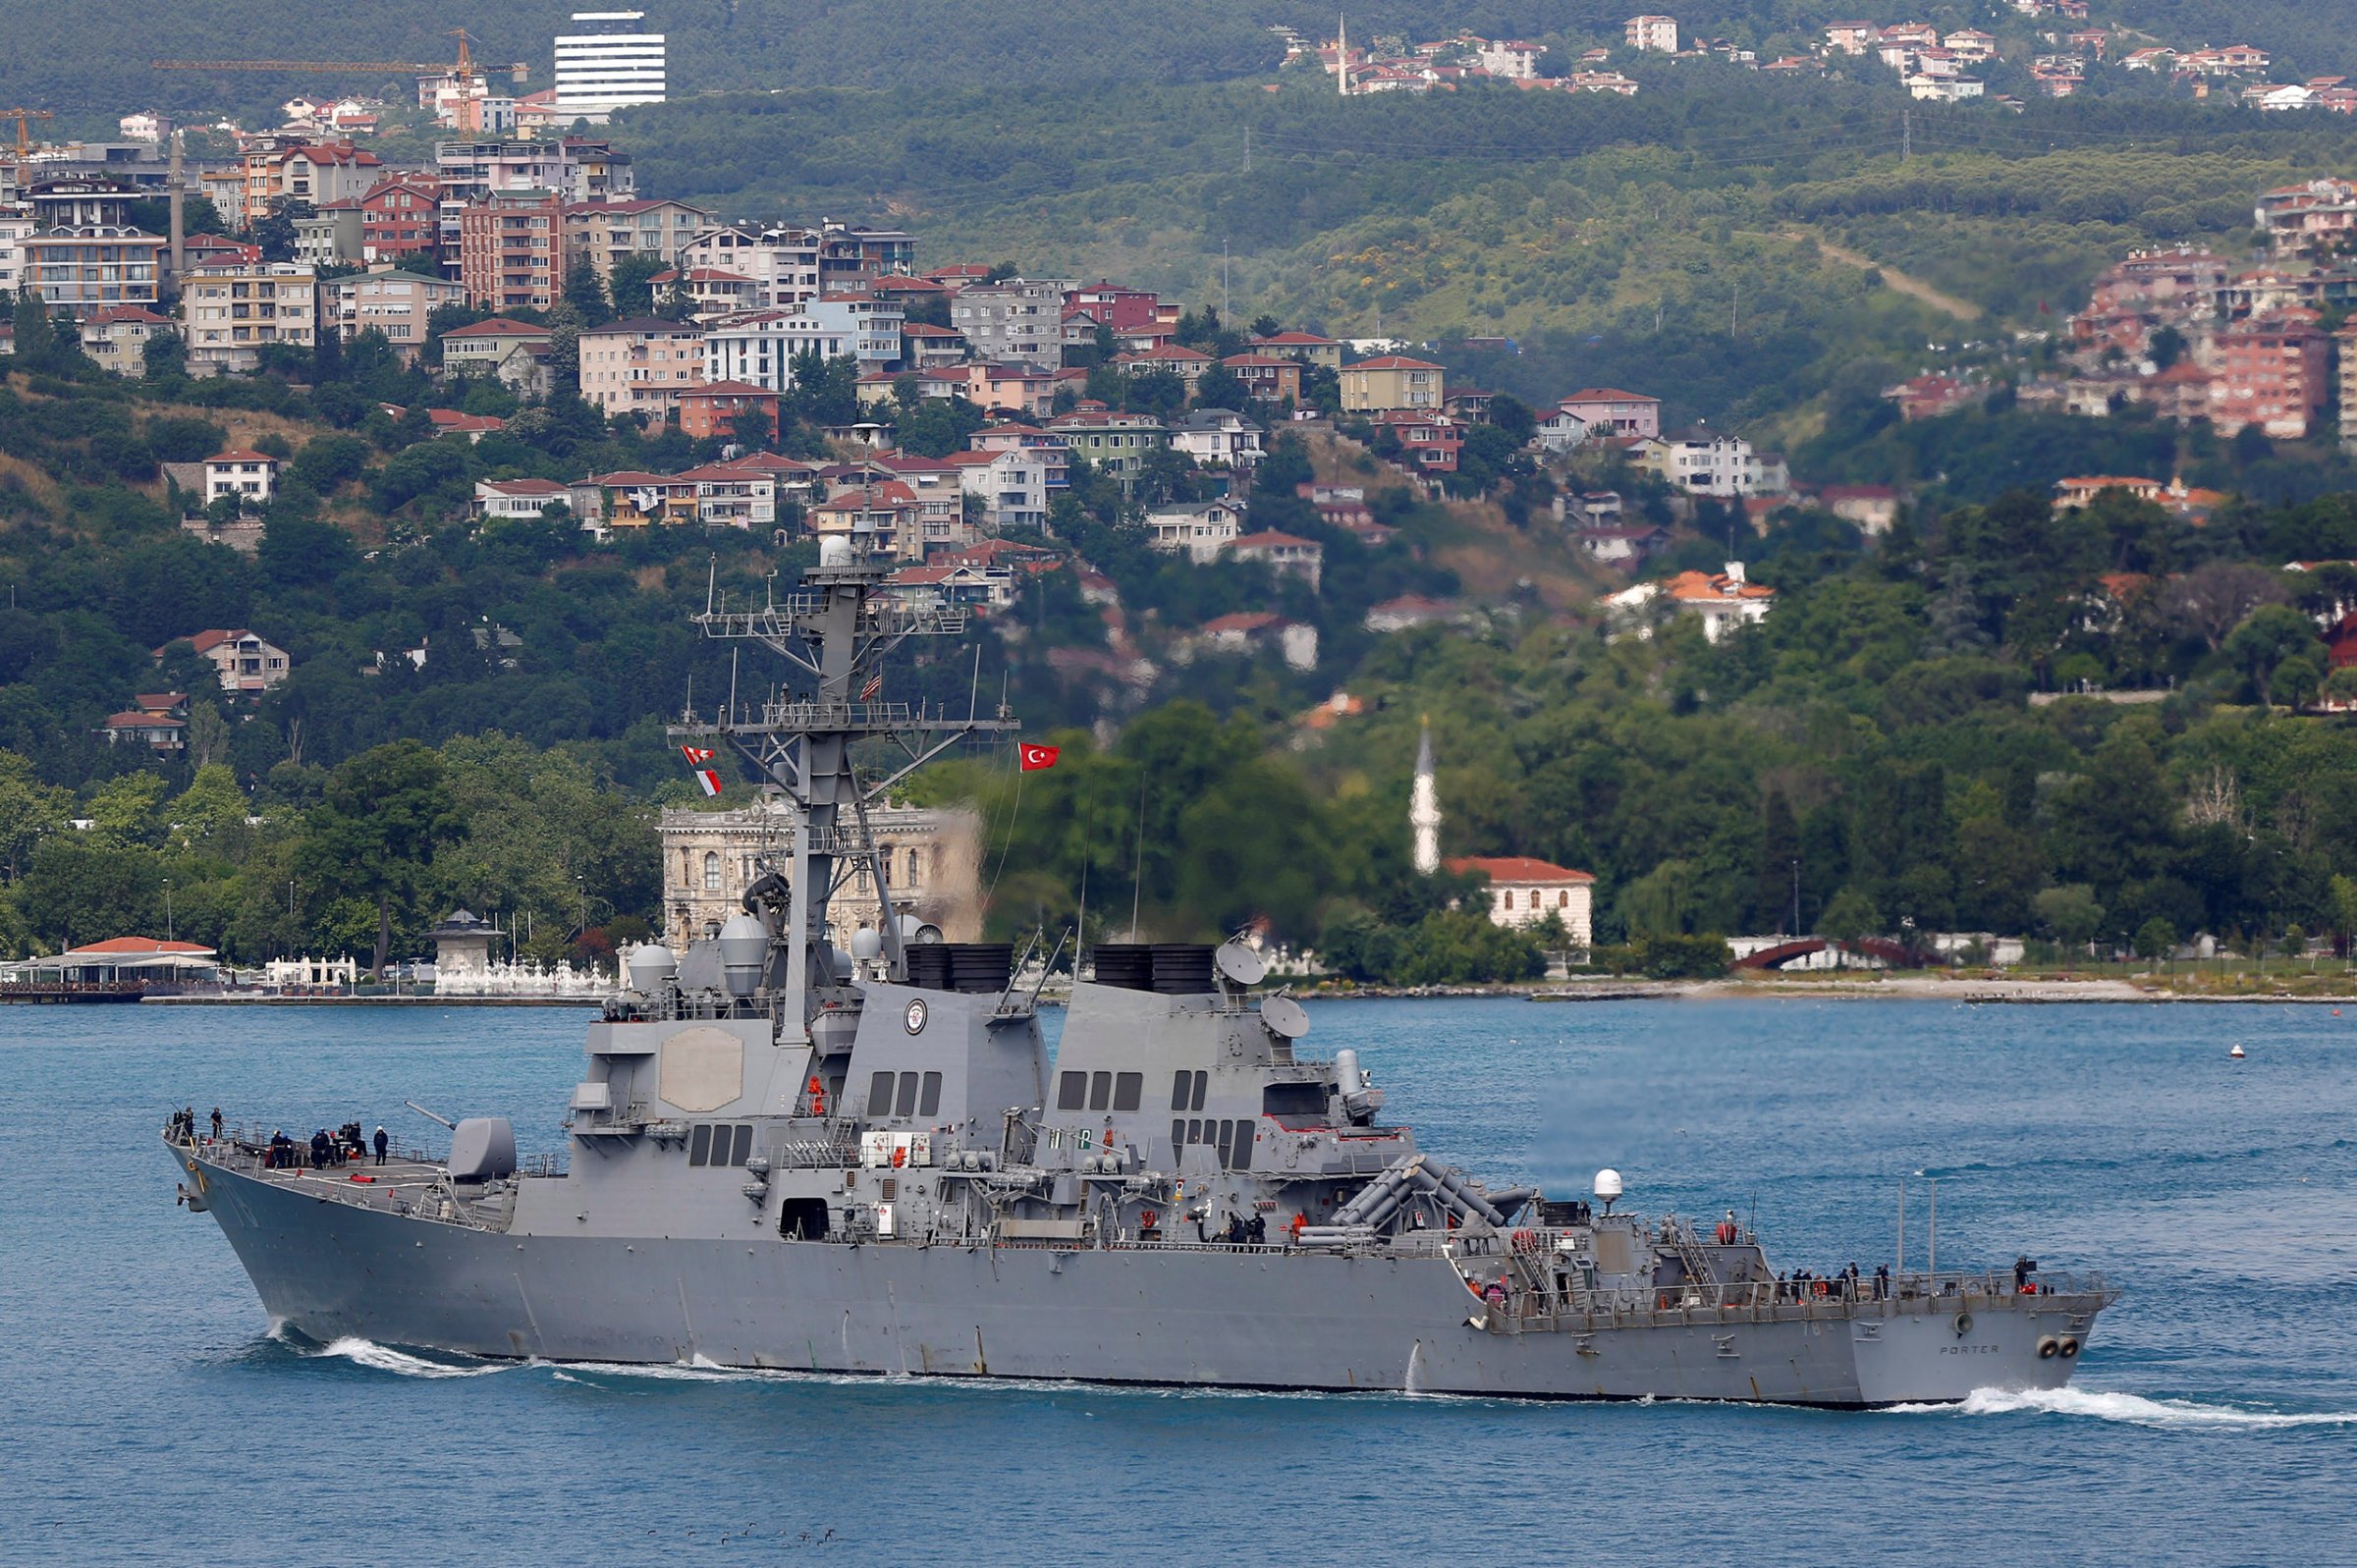 U.S. Navy guided-missile destroyer USS Porter sets sail in the Bosphorus, on its way to the Black Sea in Istanbul, Turkey, June 6, 2016.